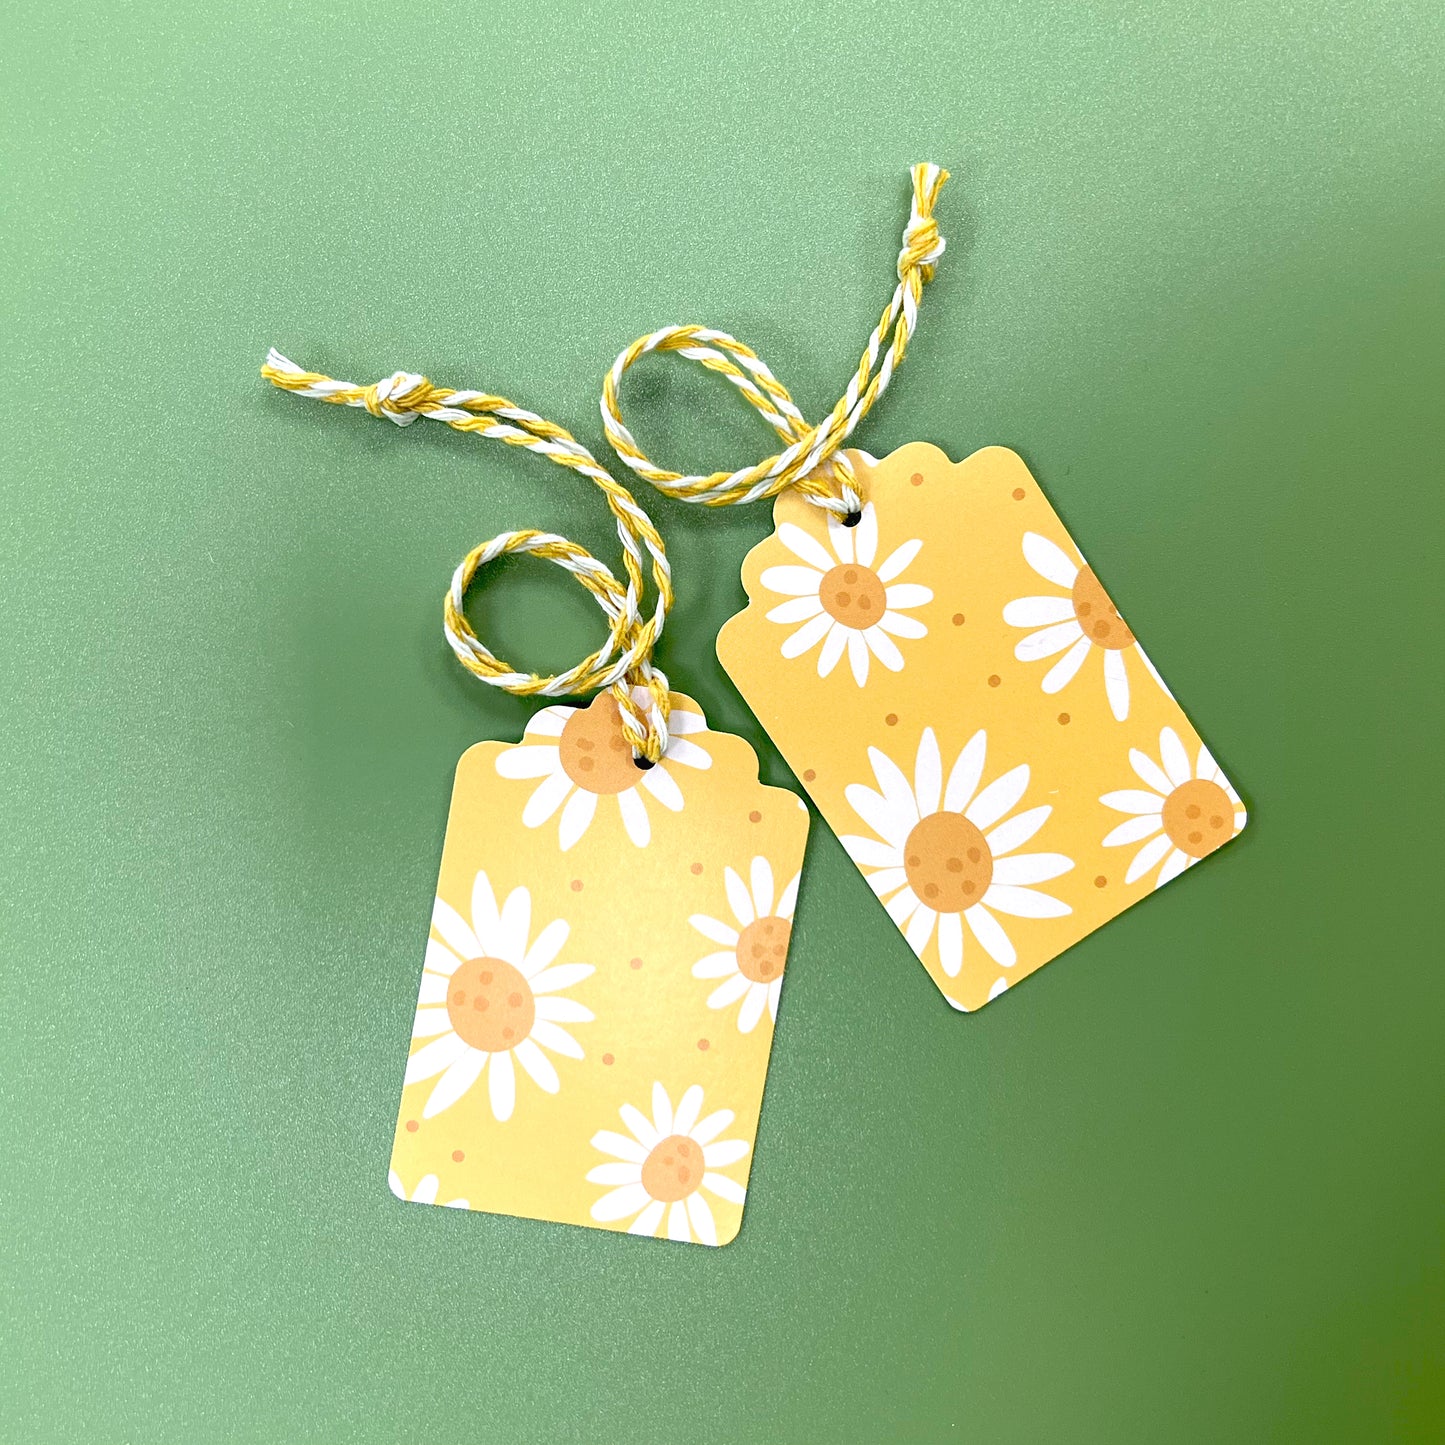 BLOOMIN' LOVELY GIFT TAGS (SET OF 2)